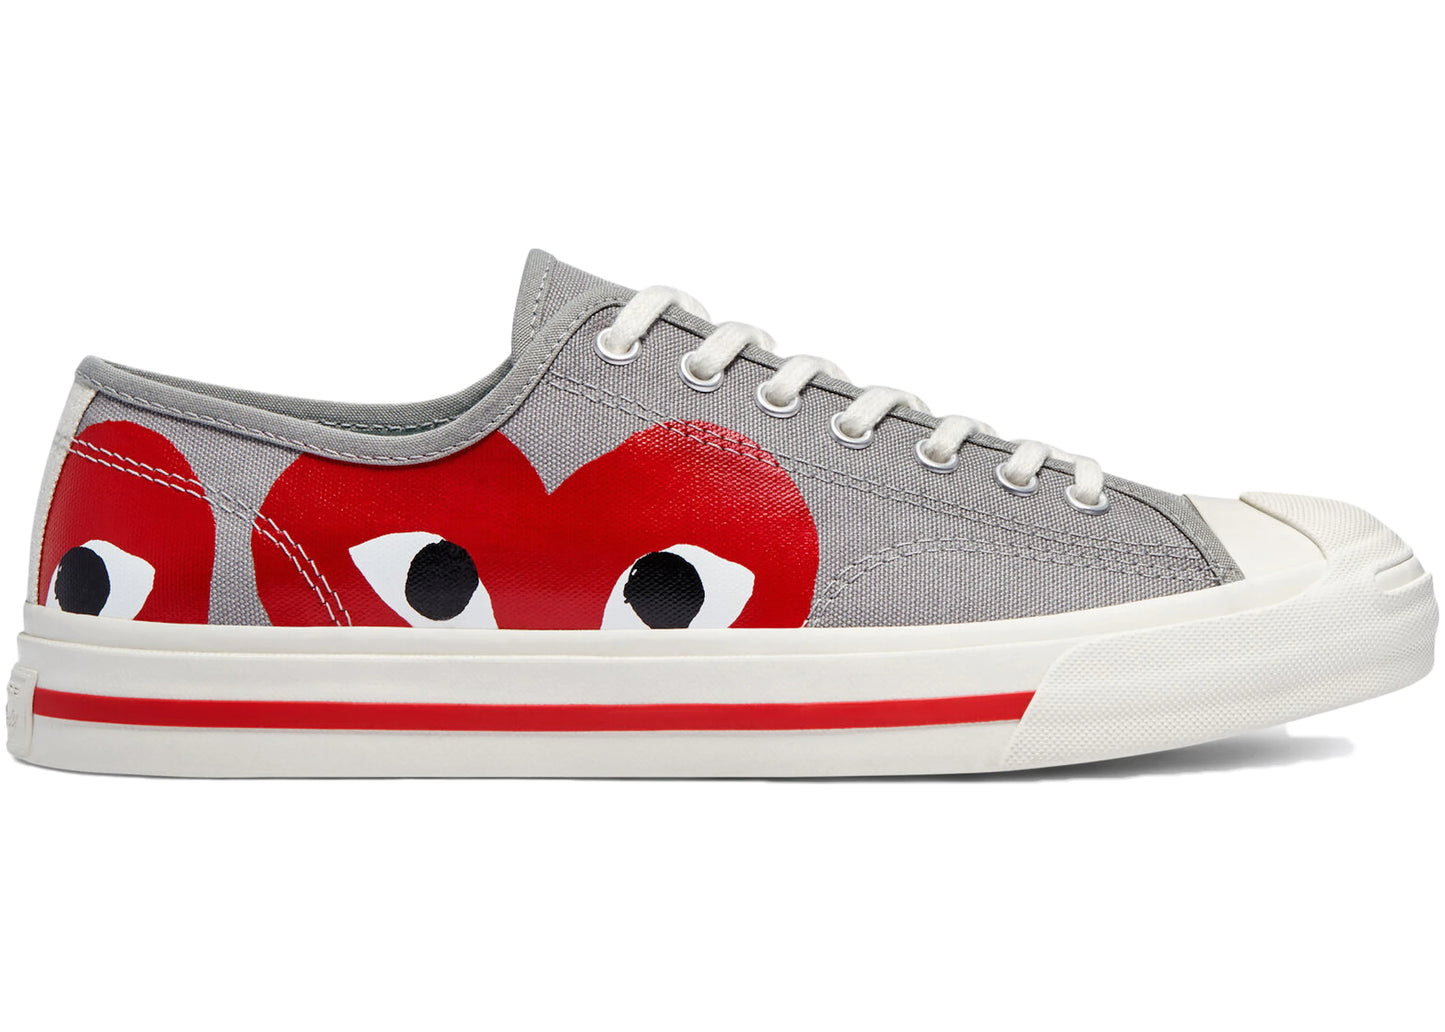 Converse Jack Purcell Low CDG Grey Red